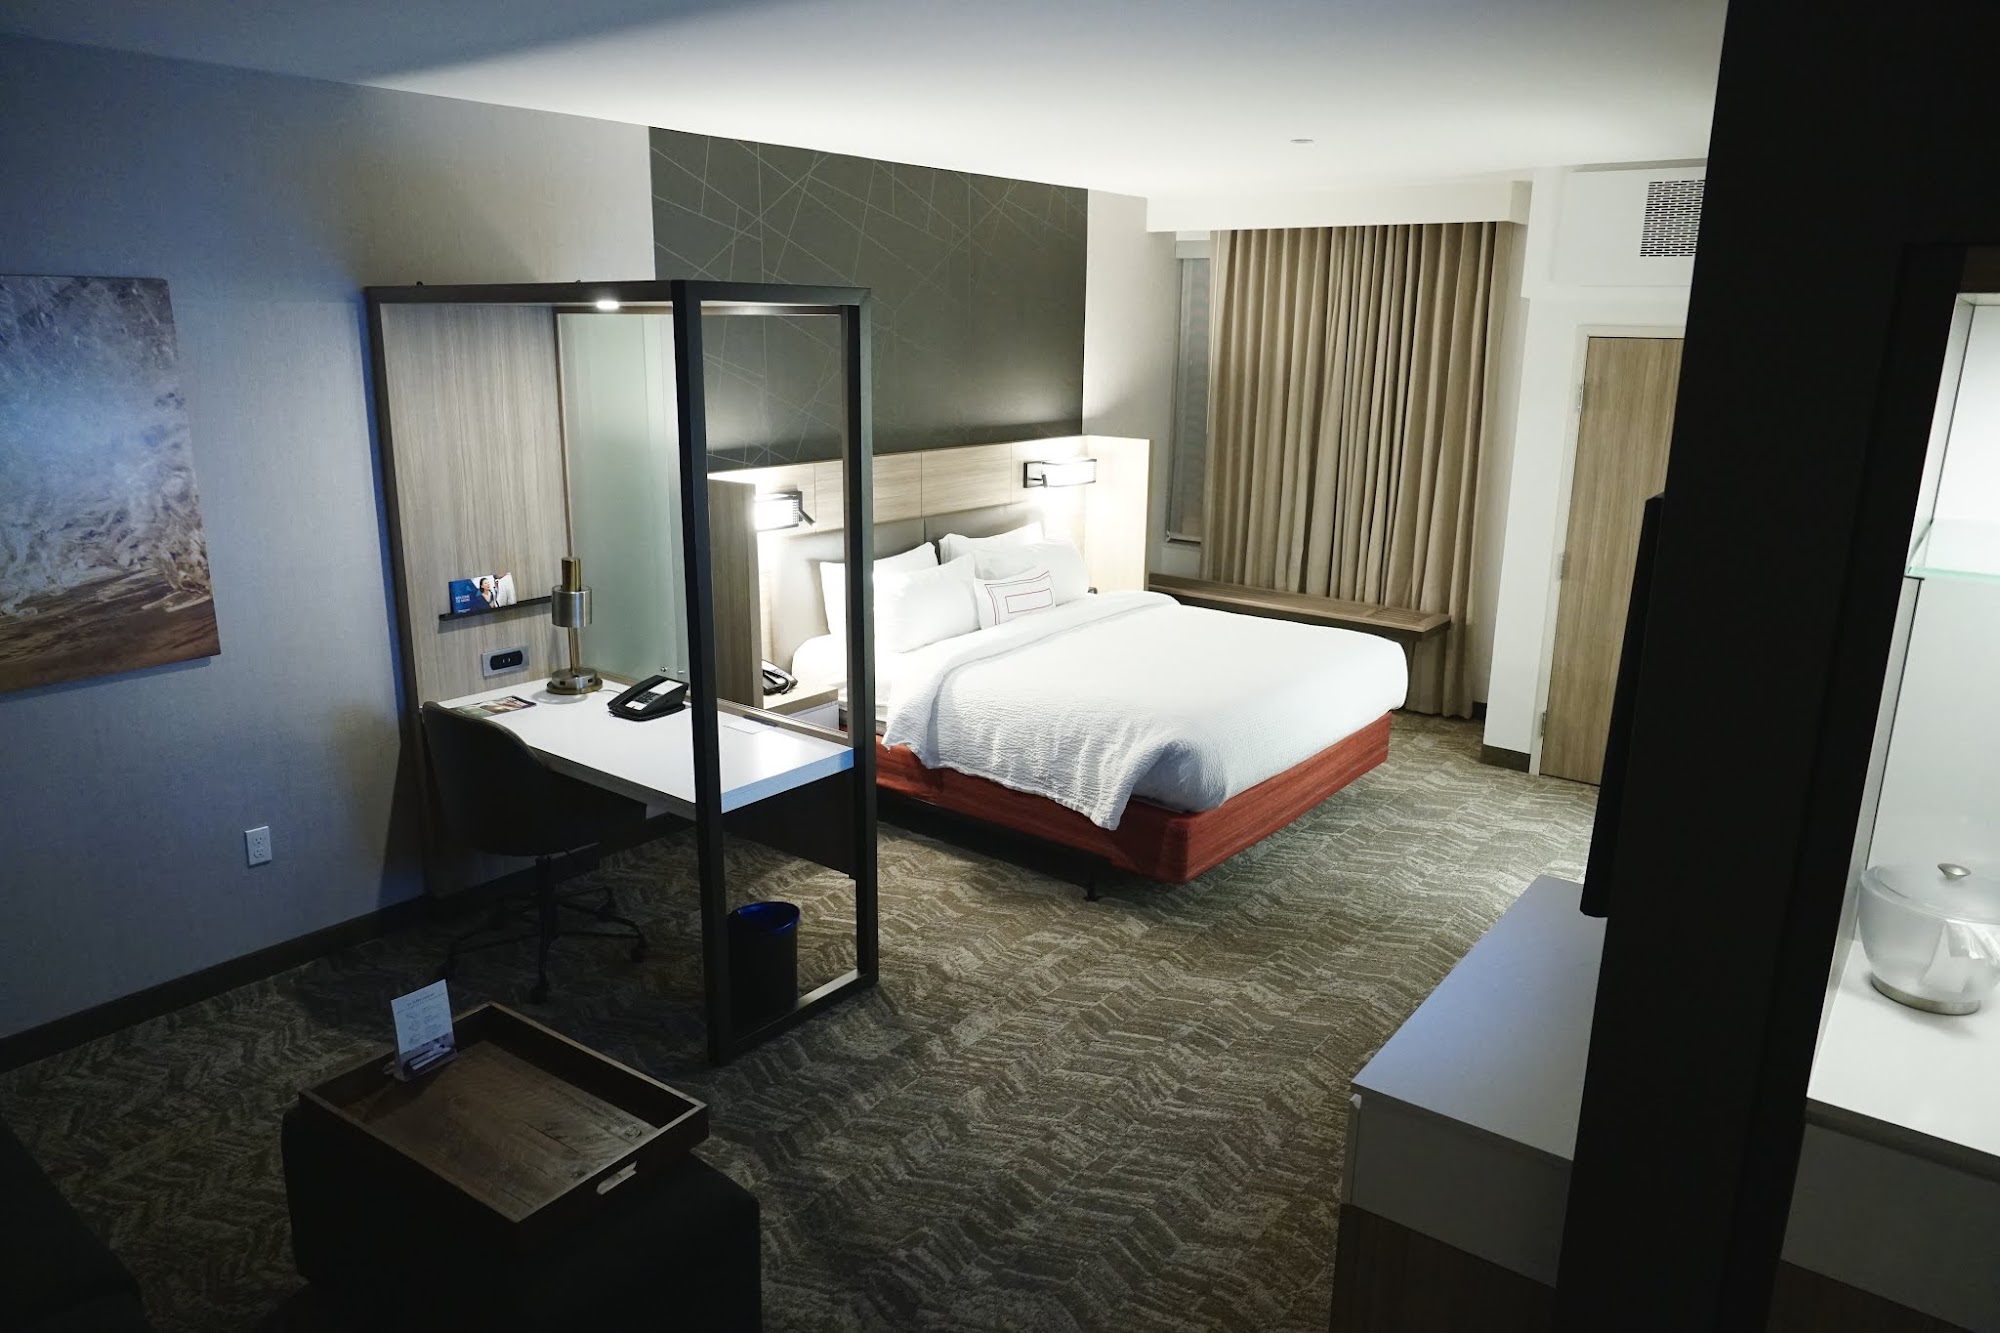 SpringHill Suites by Marriott Ontario Airport/Rancho Cucamonga